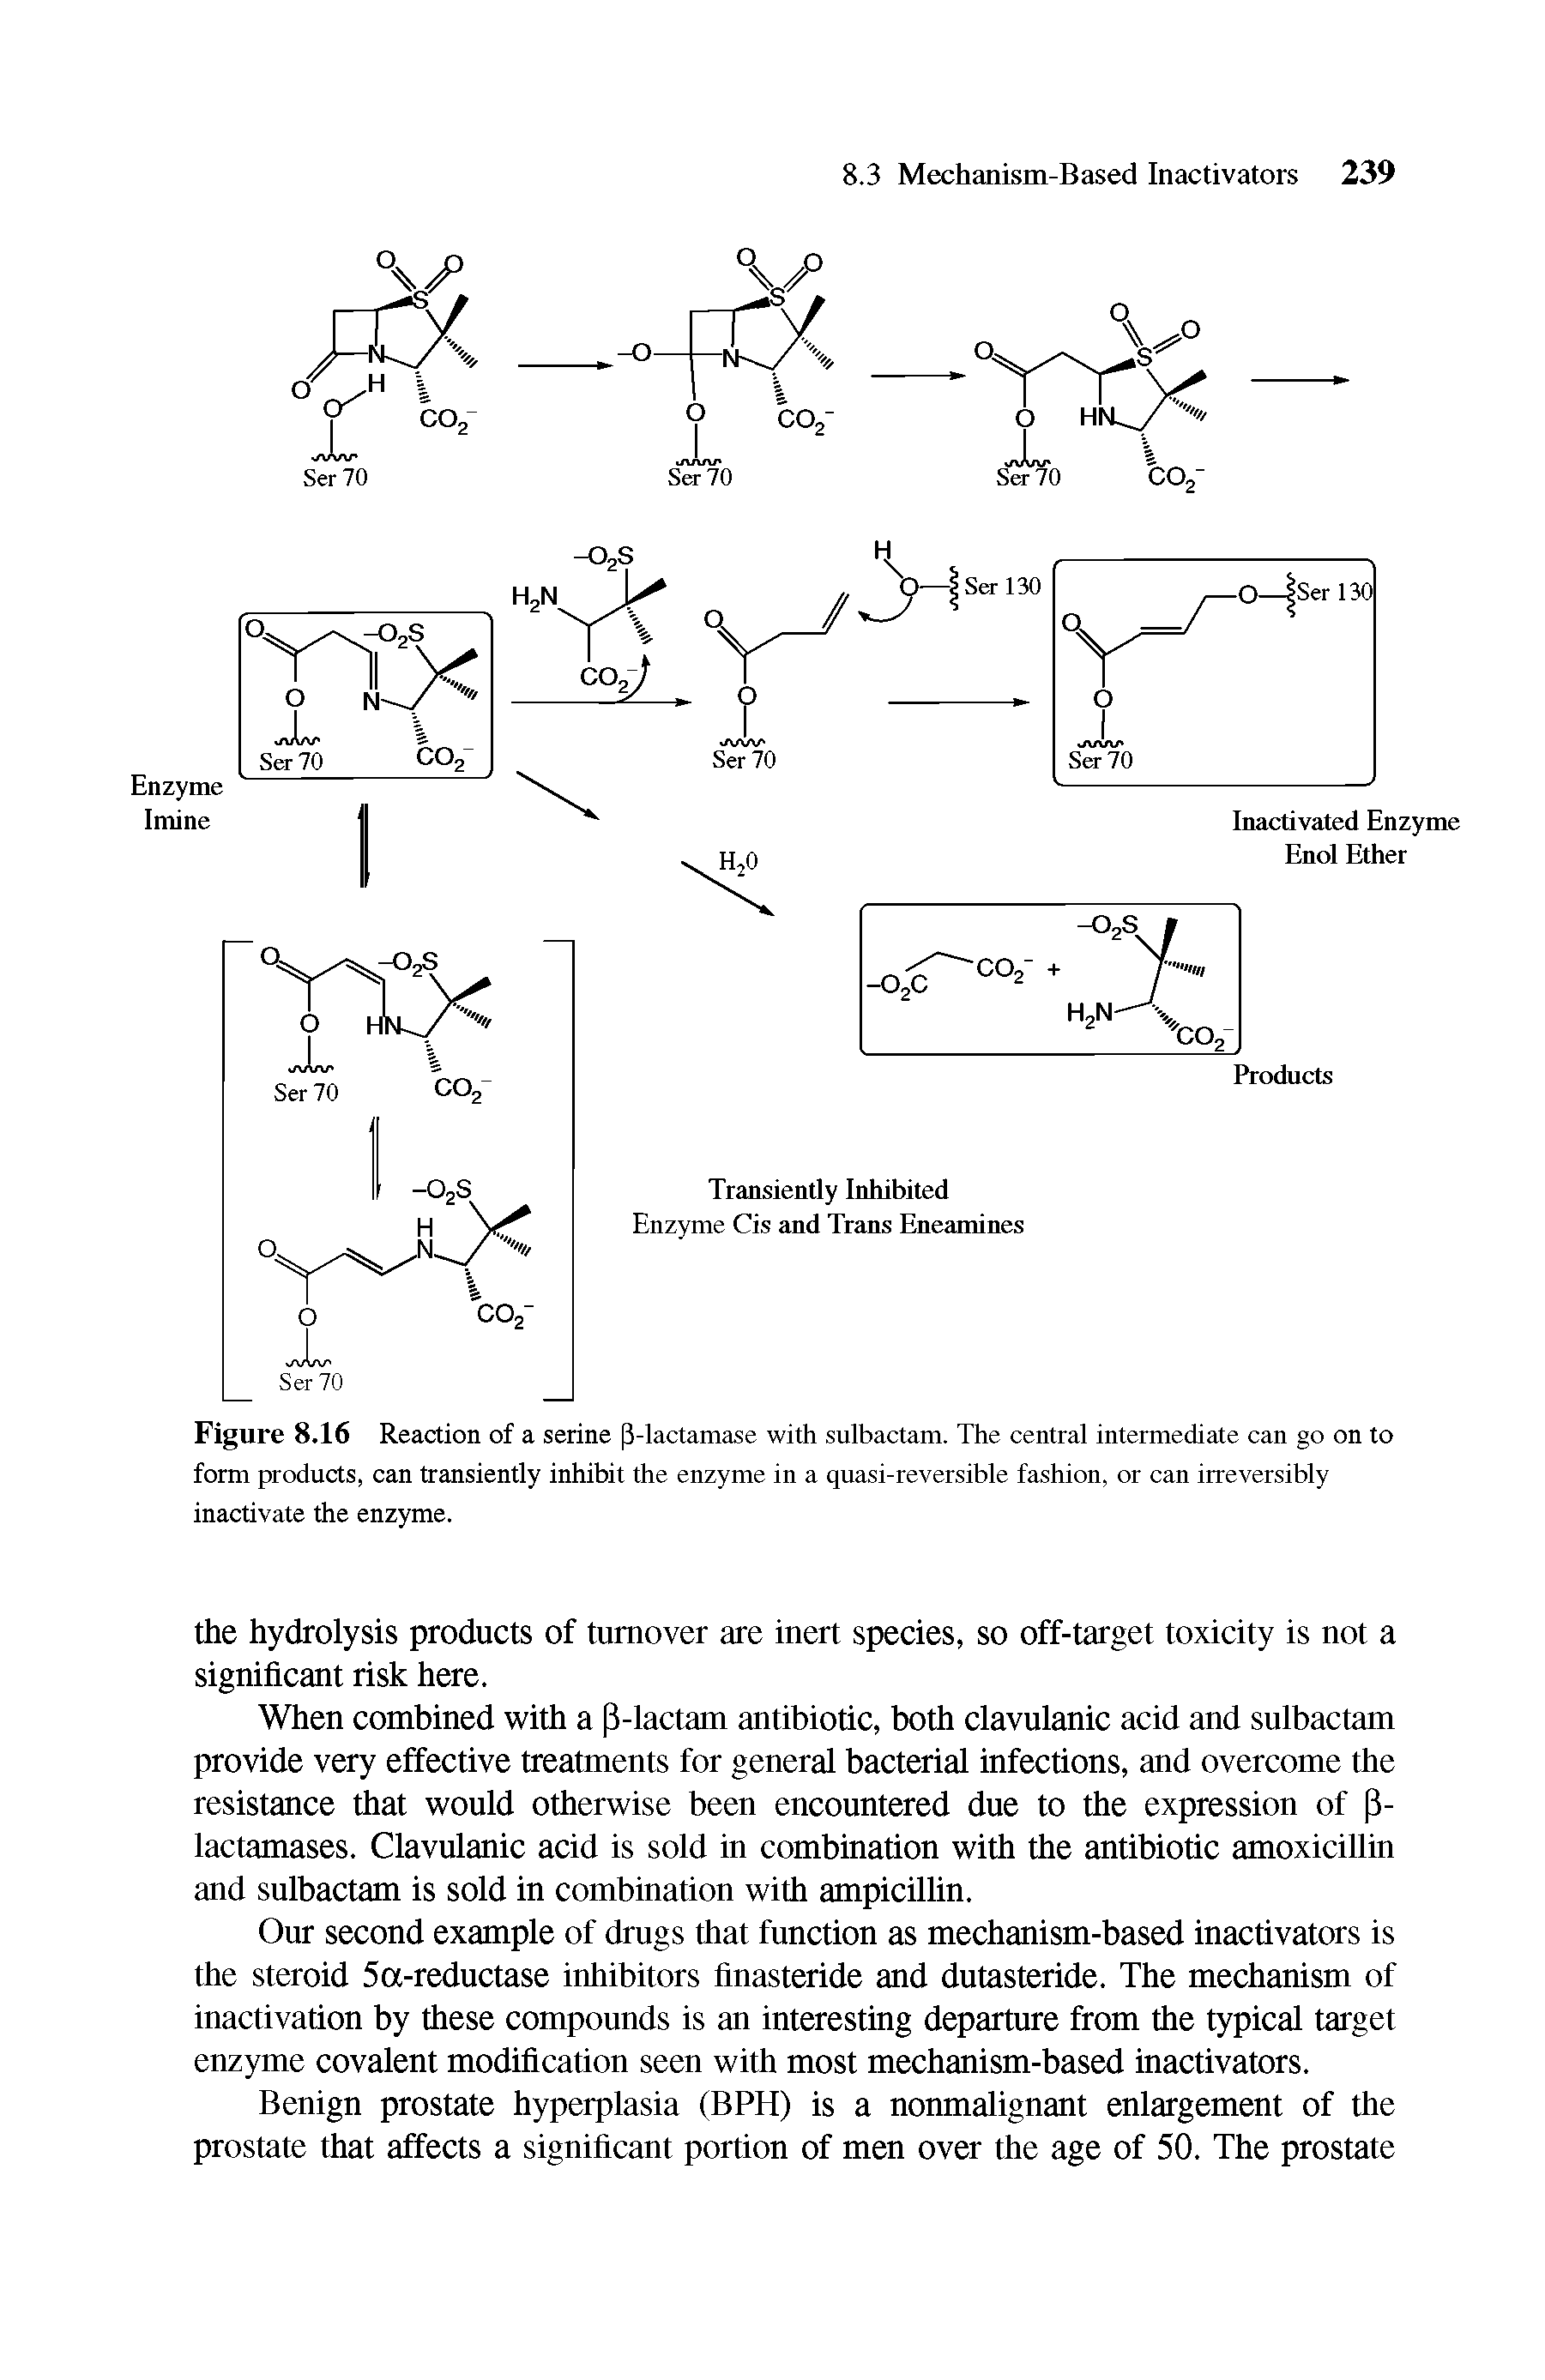 Figure 8.16 Reaction of a serine (3-lactamase with sulbactam. The central intermediate can go on to form products, can transiently inhibit the enzyme in a quasi-reversible fashion, or can irreversibly inactivate the enzyme.